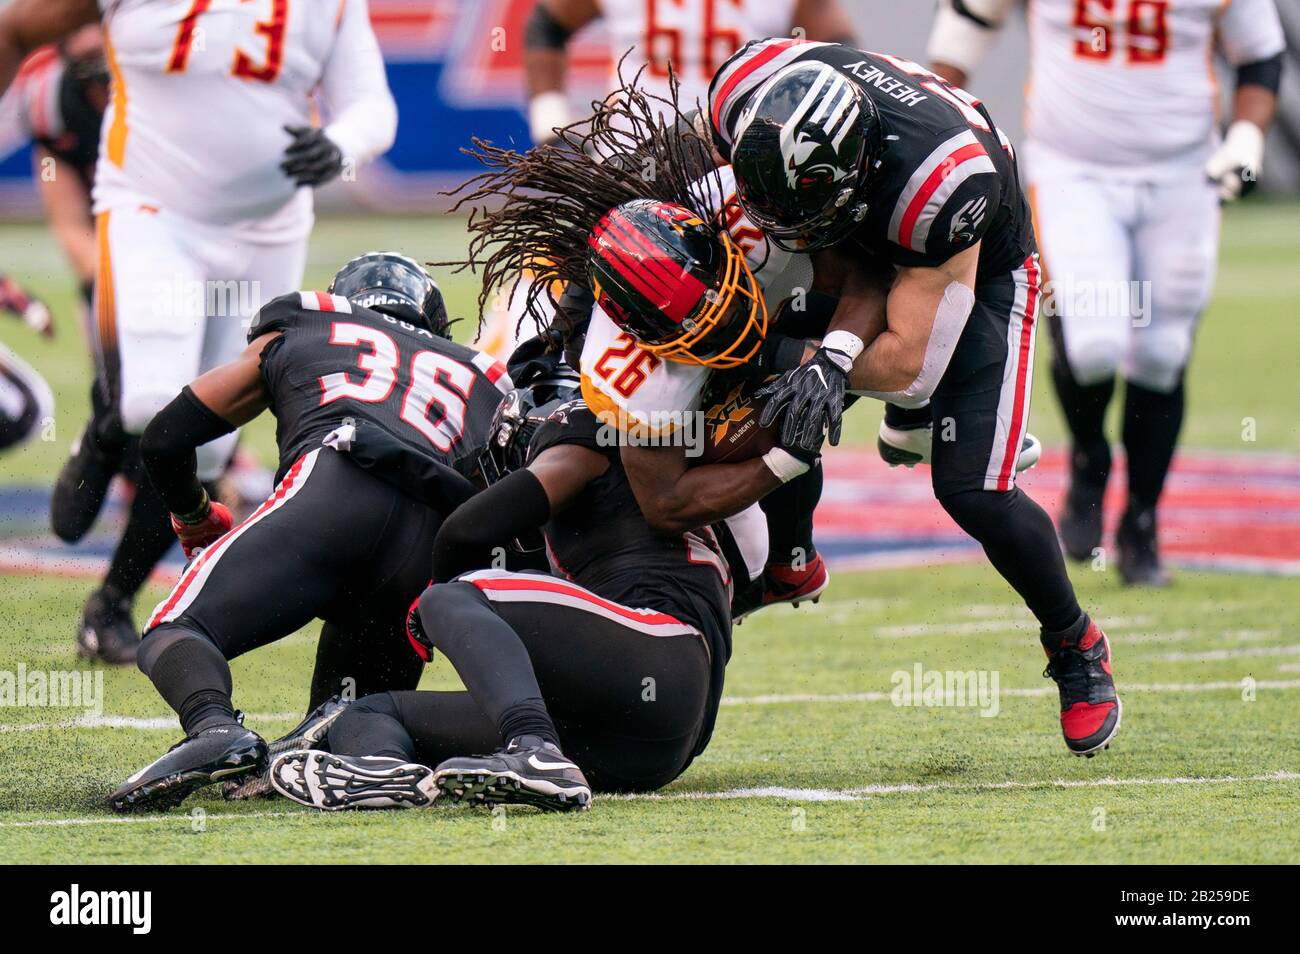 East Rutherford, New Jersey, USA. 29th Feb, 2020. Los Angeles Wildcats running back Harris DuJuan (26) gets tackled by New York Guardians linebacker Ben Heeney (56) and safety Andrew Soroh (30) during the XFL game at MetLife Stadium in East Rutherford, New Jersey. Guardians won 17-14. Christopher Szagola/CSM/Alamy Live News Stock Photo